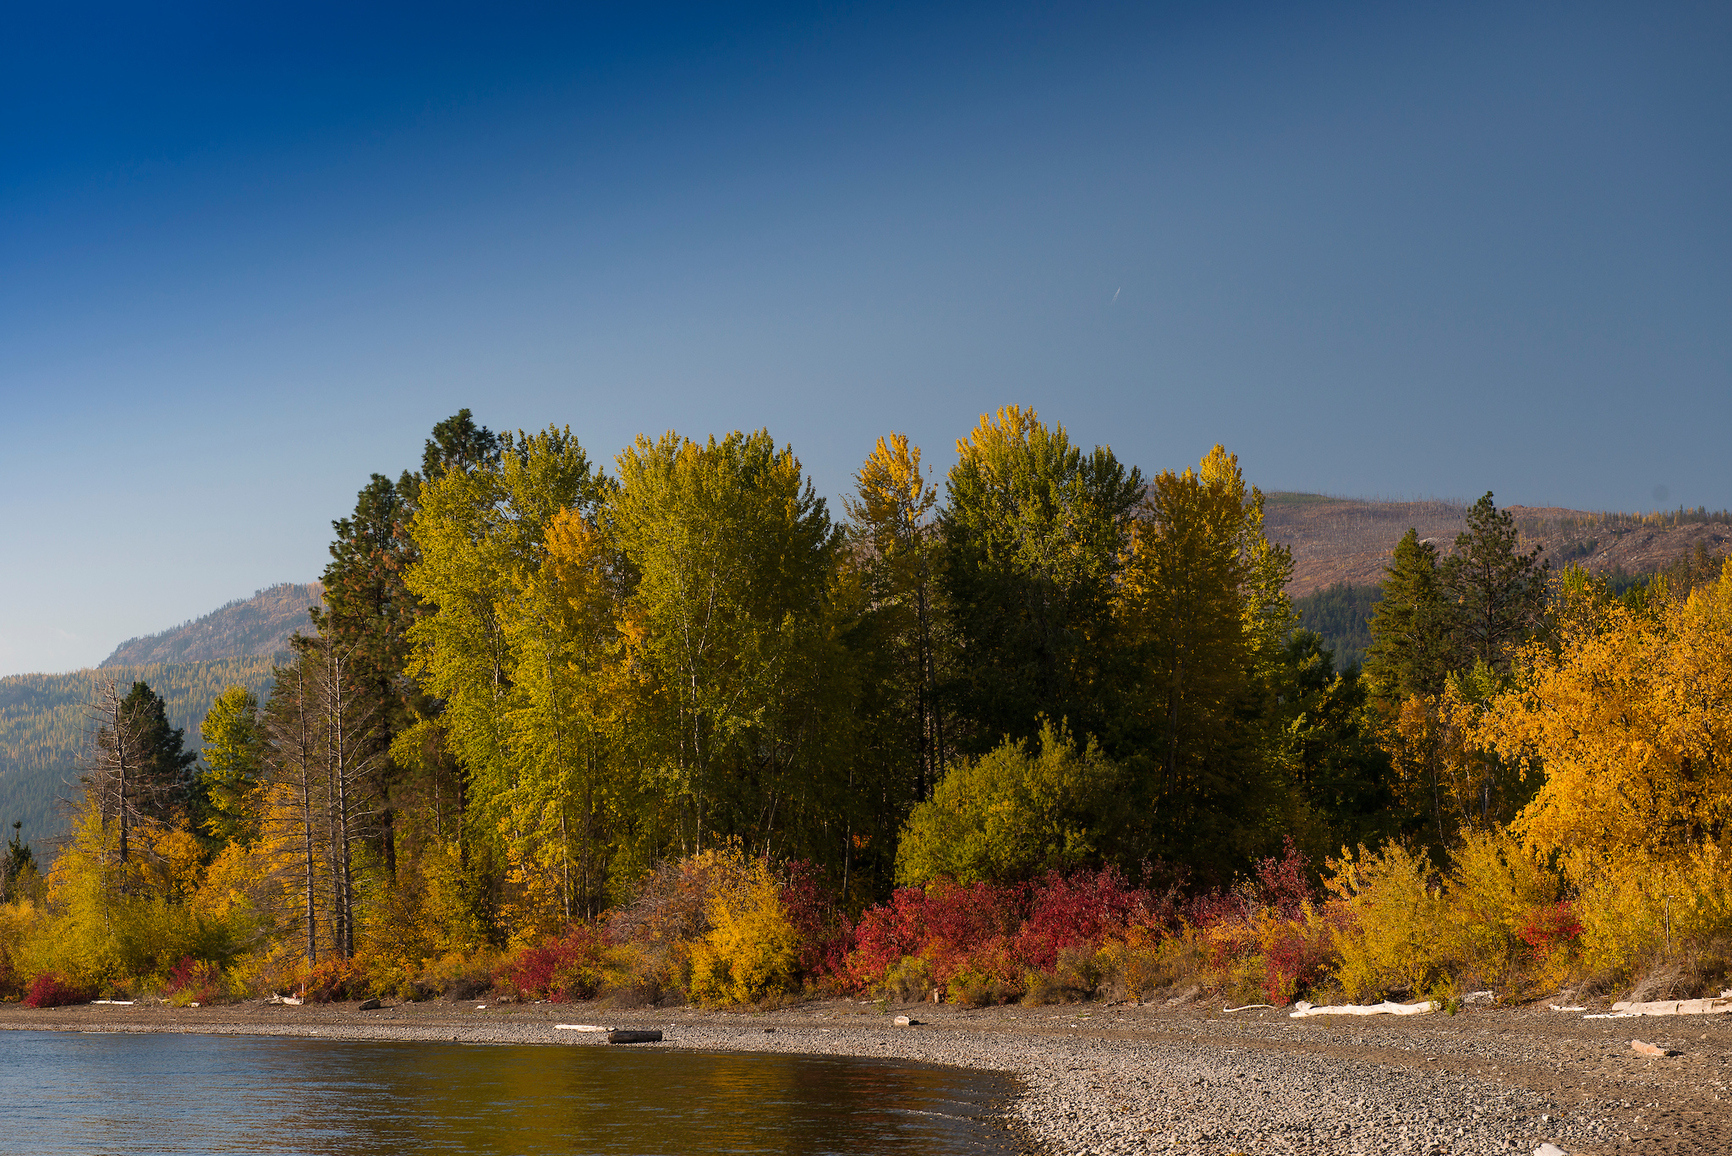 Rocky beach shoreline with deciduous trees changing colour to yellows and reds